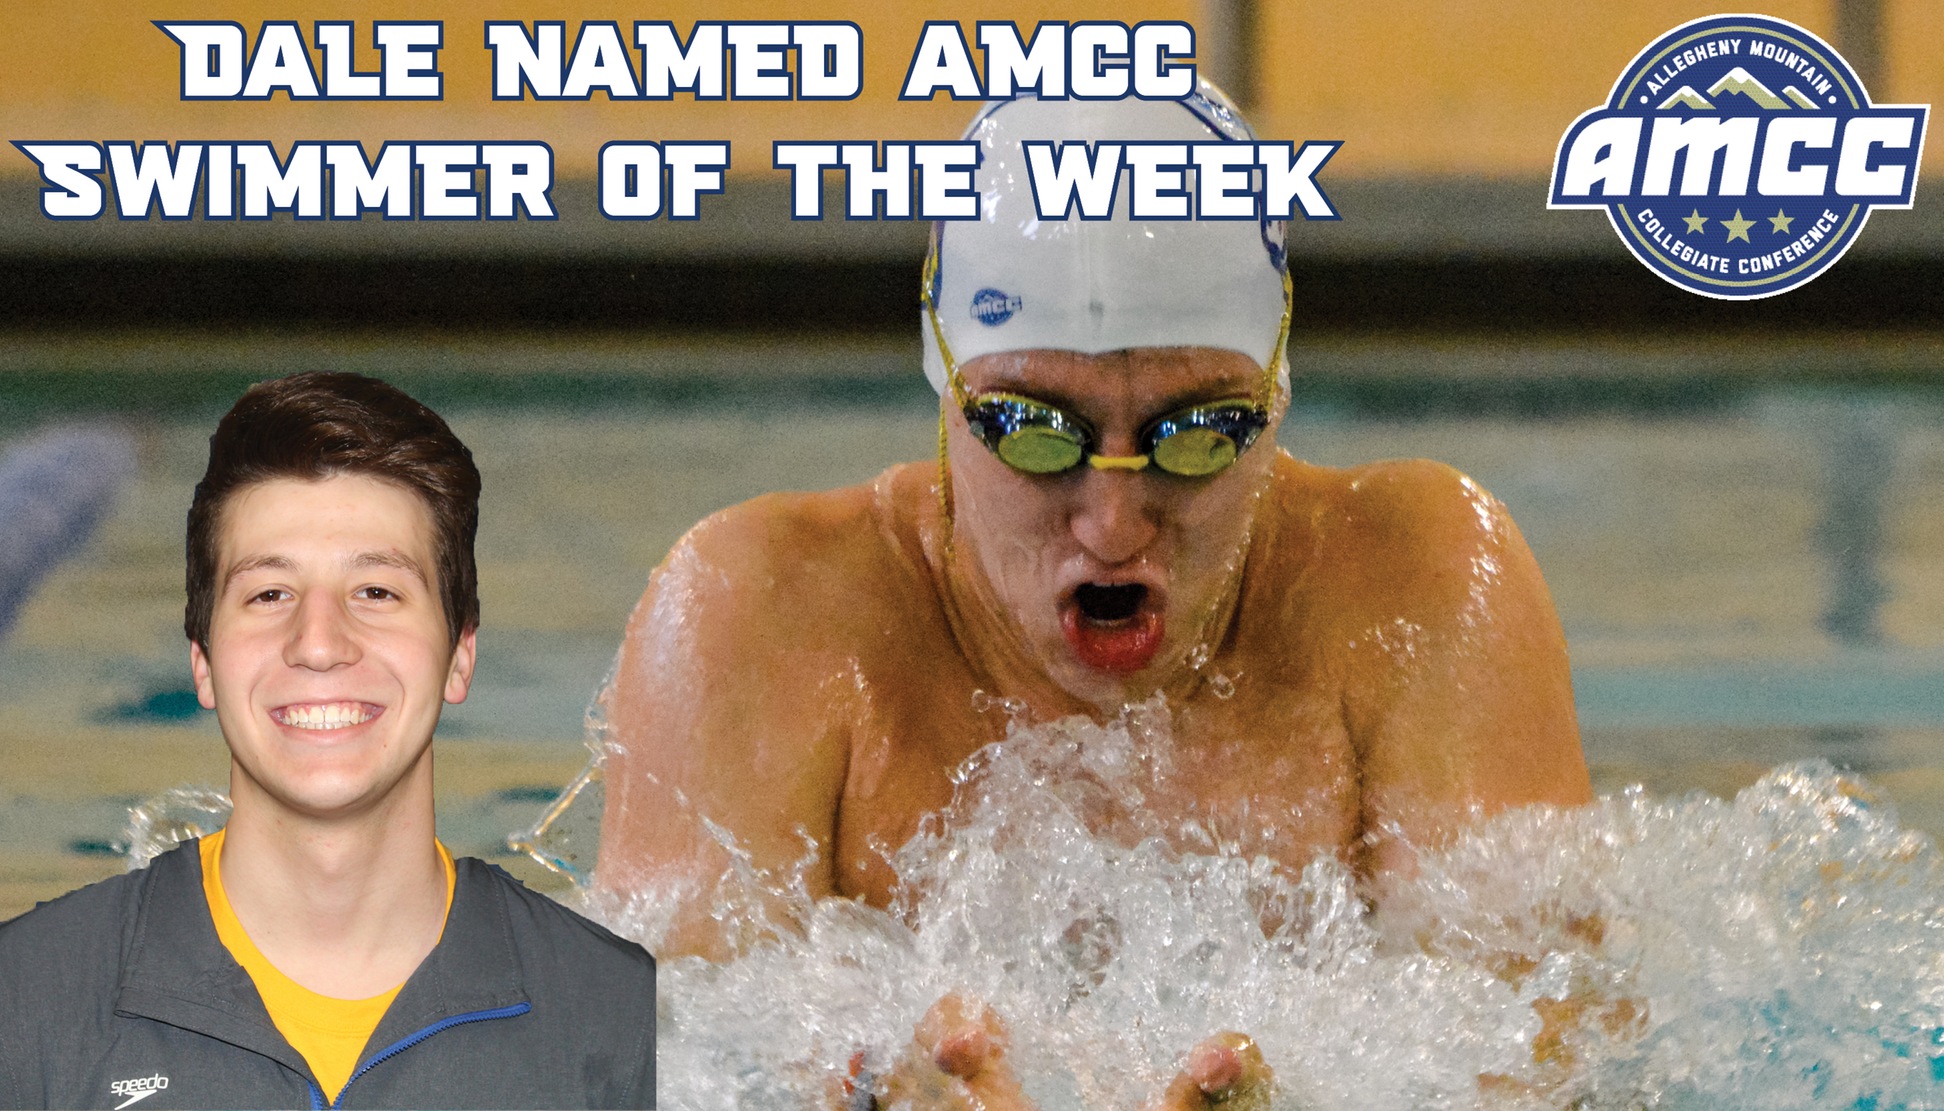 Ethan Dale named AMCC Swimmer of the Week